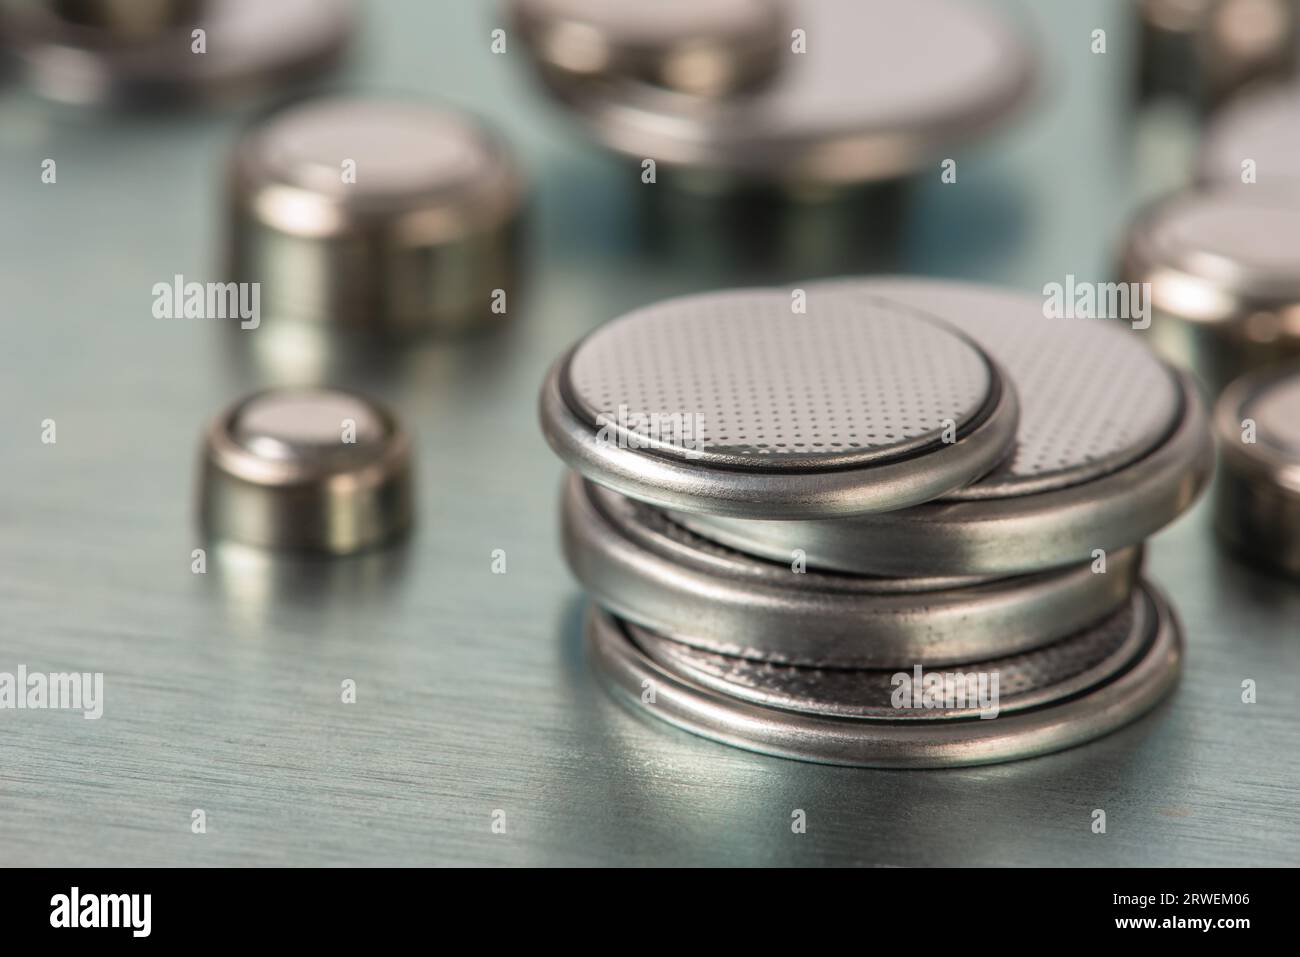 Group of button cell lithium battery, close-up Stock Photo